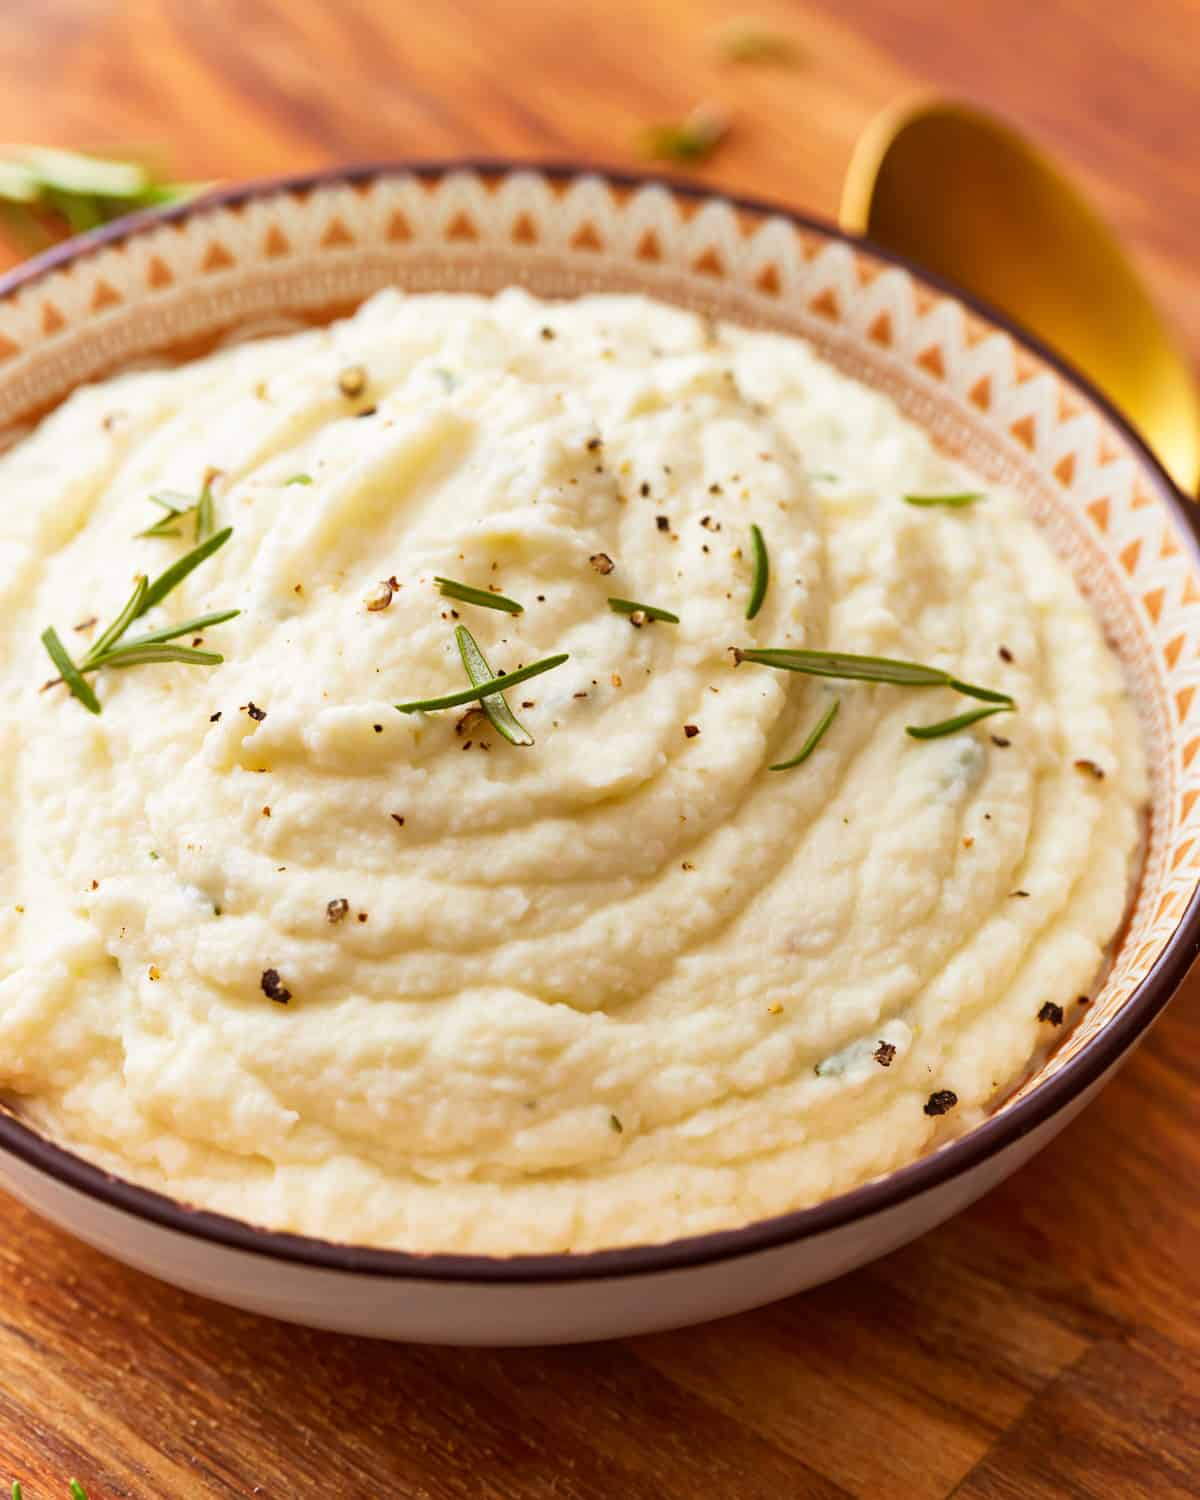 A bowl of mashed cauliflower with sprigs of rosemary.